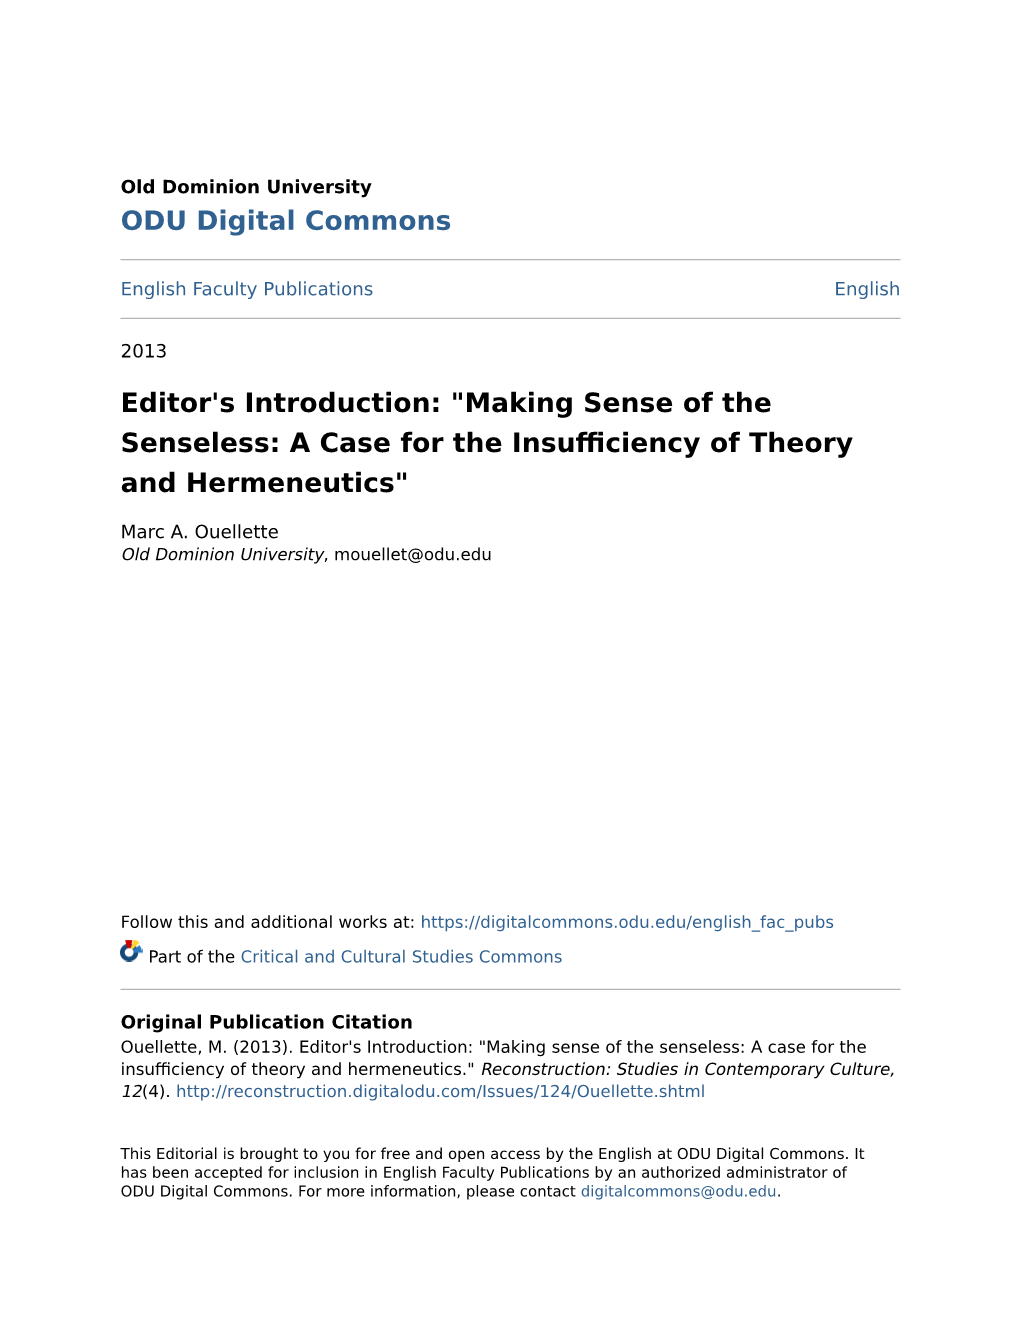 Editor's Introduction: "Making Sense of the Senseless: a Case for the Insufficiency of Theory and Hermeneutics"